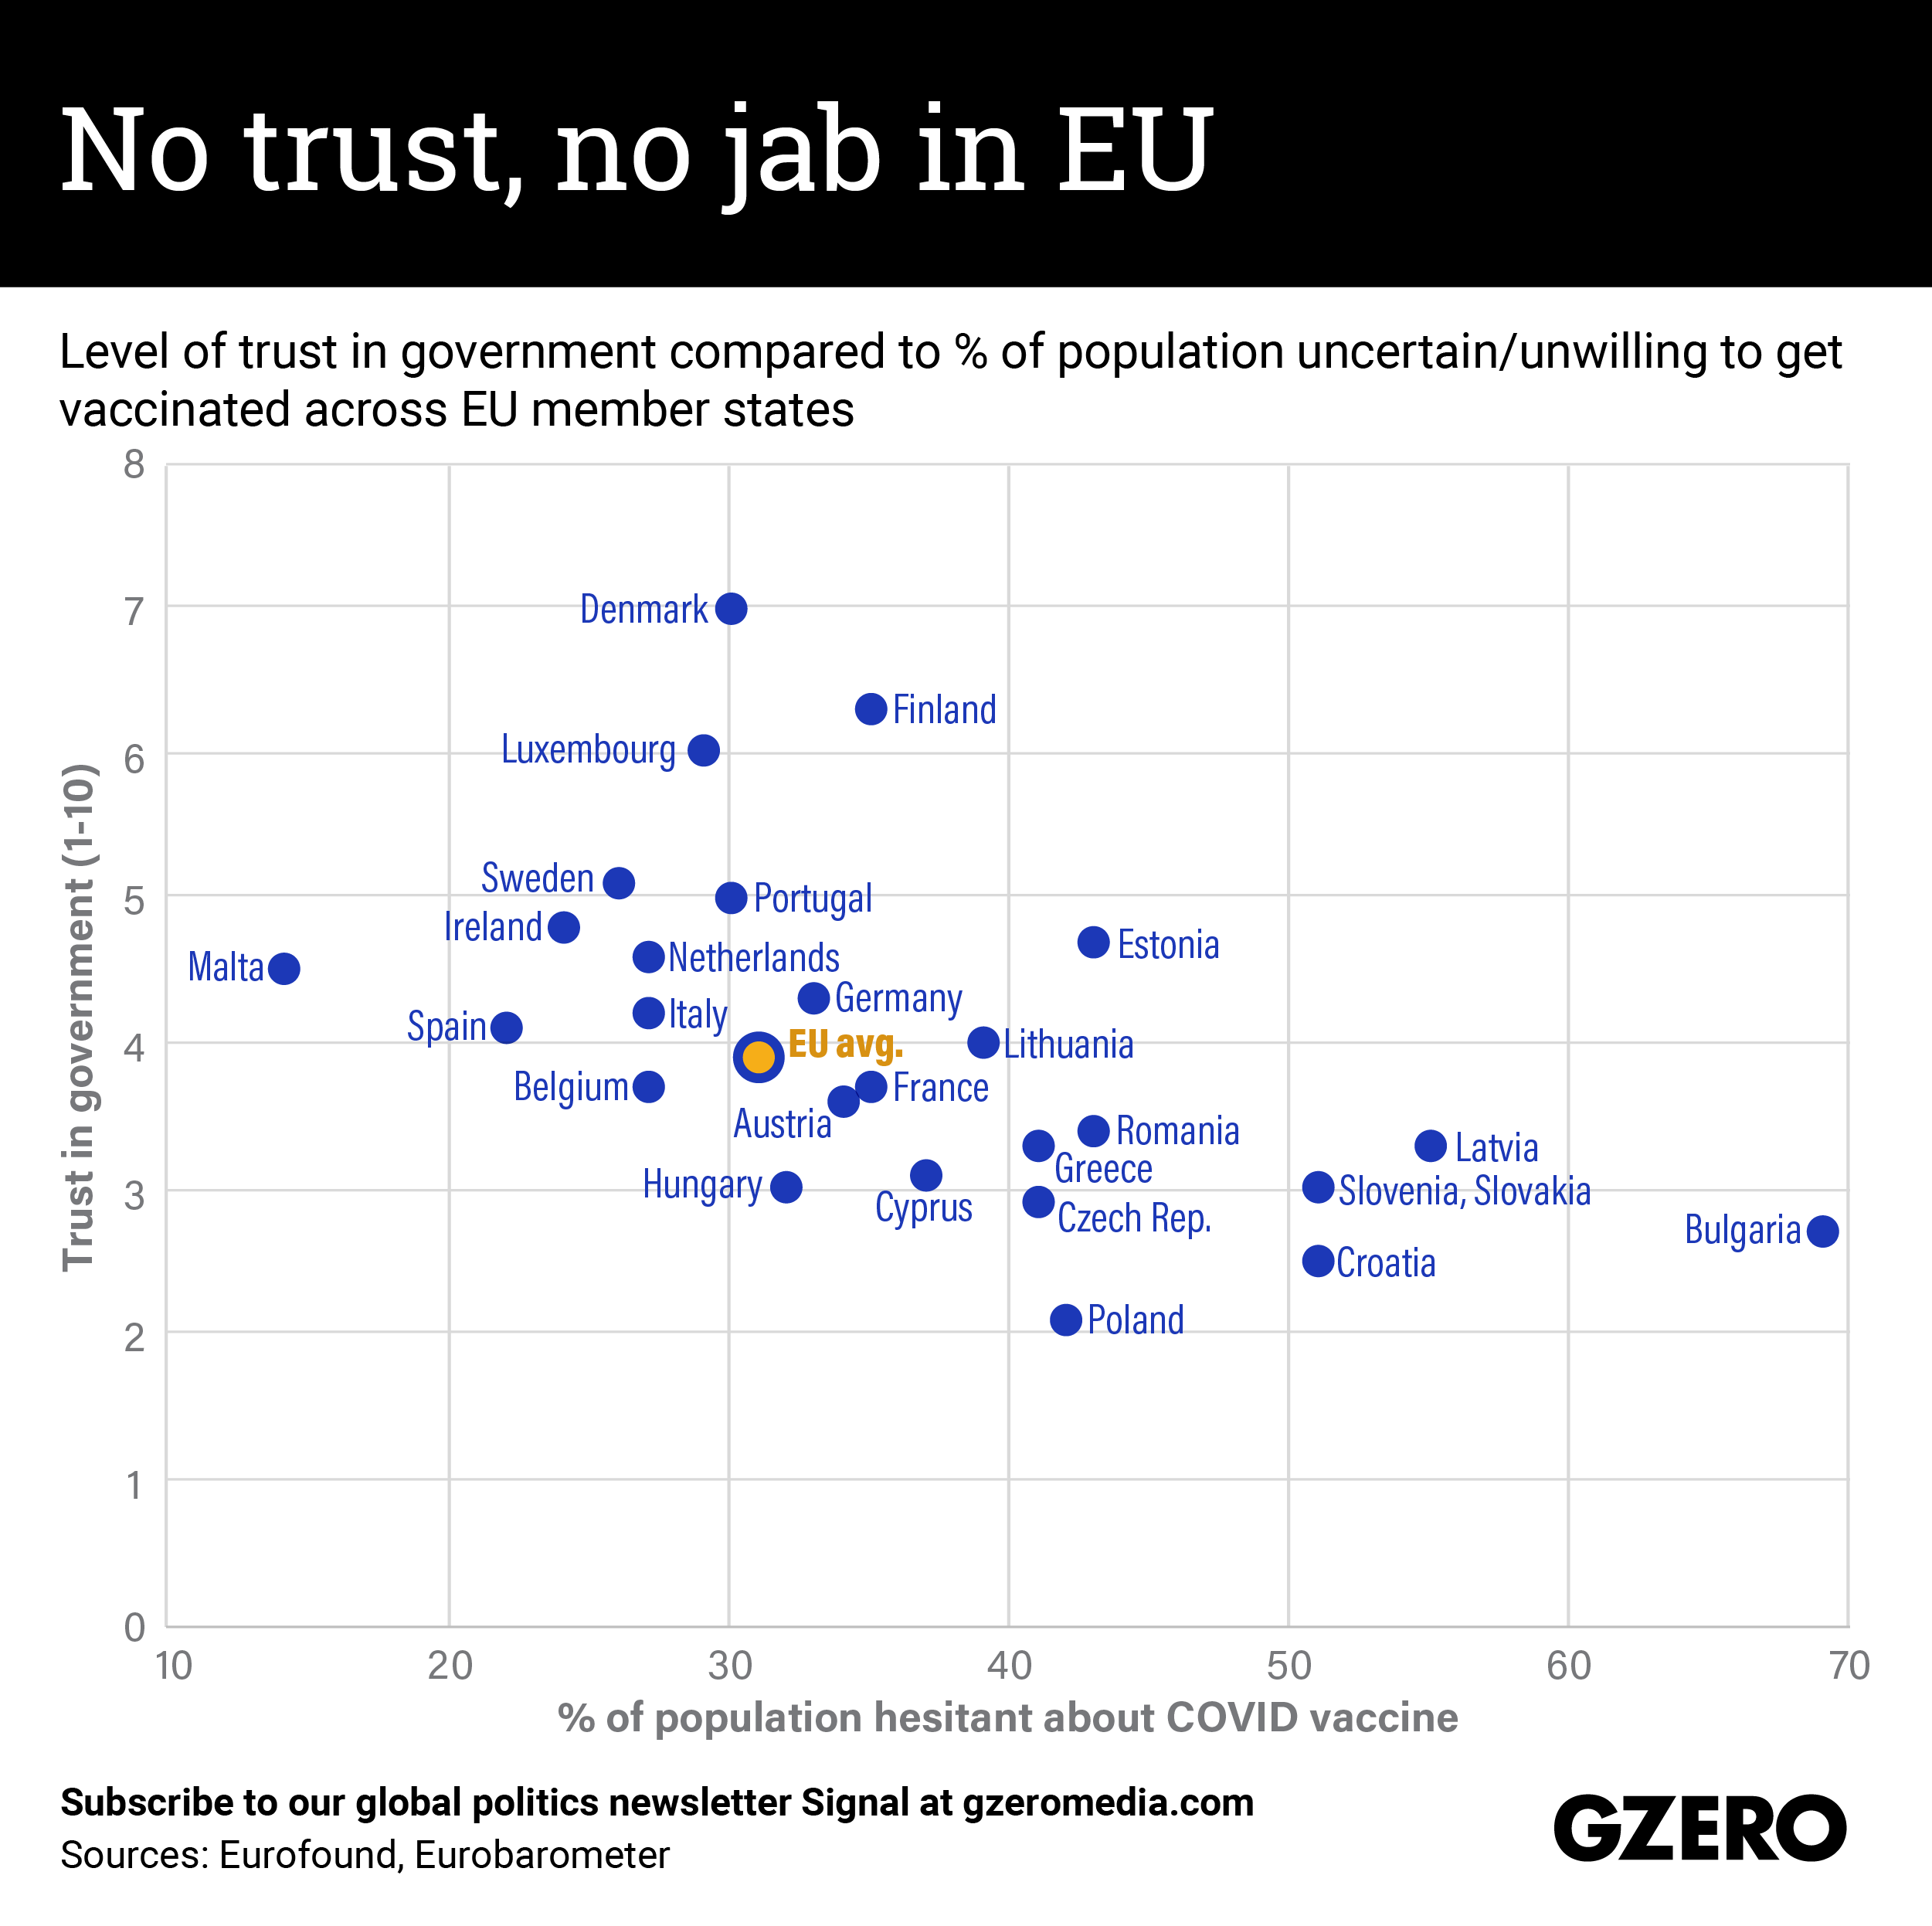 Level of trust in government compared to % of population uncertain/unwilling to get vaccinated across EU member states